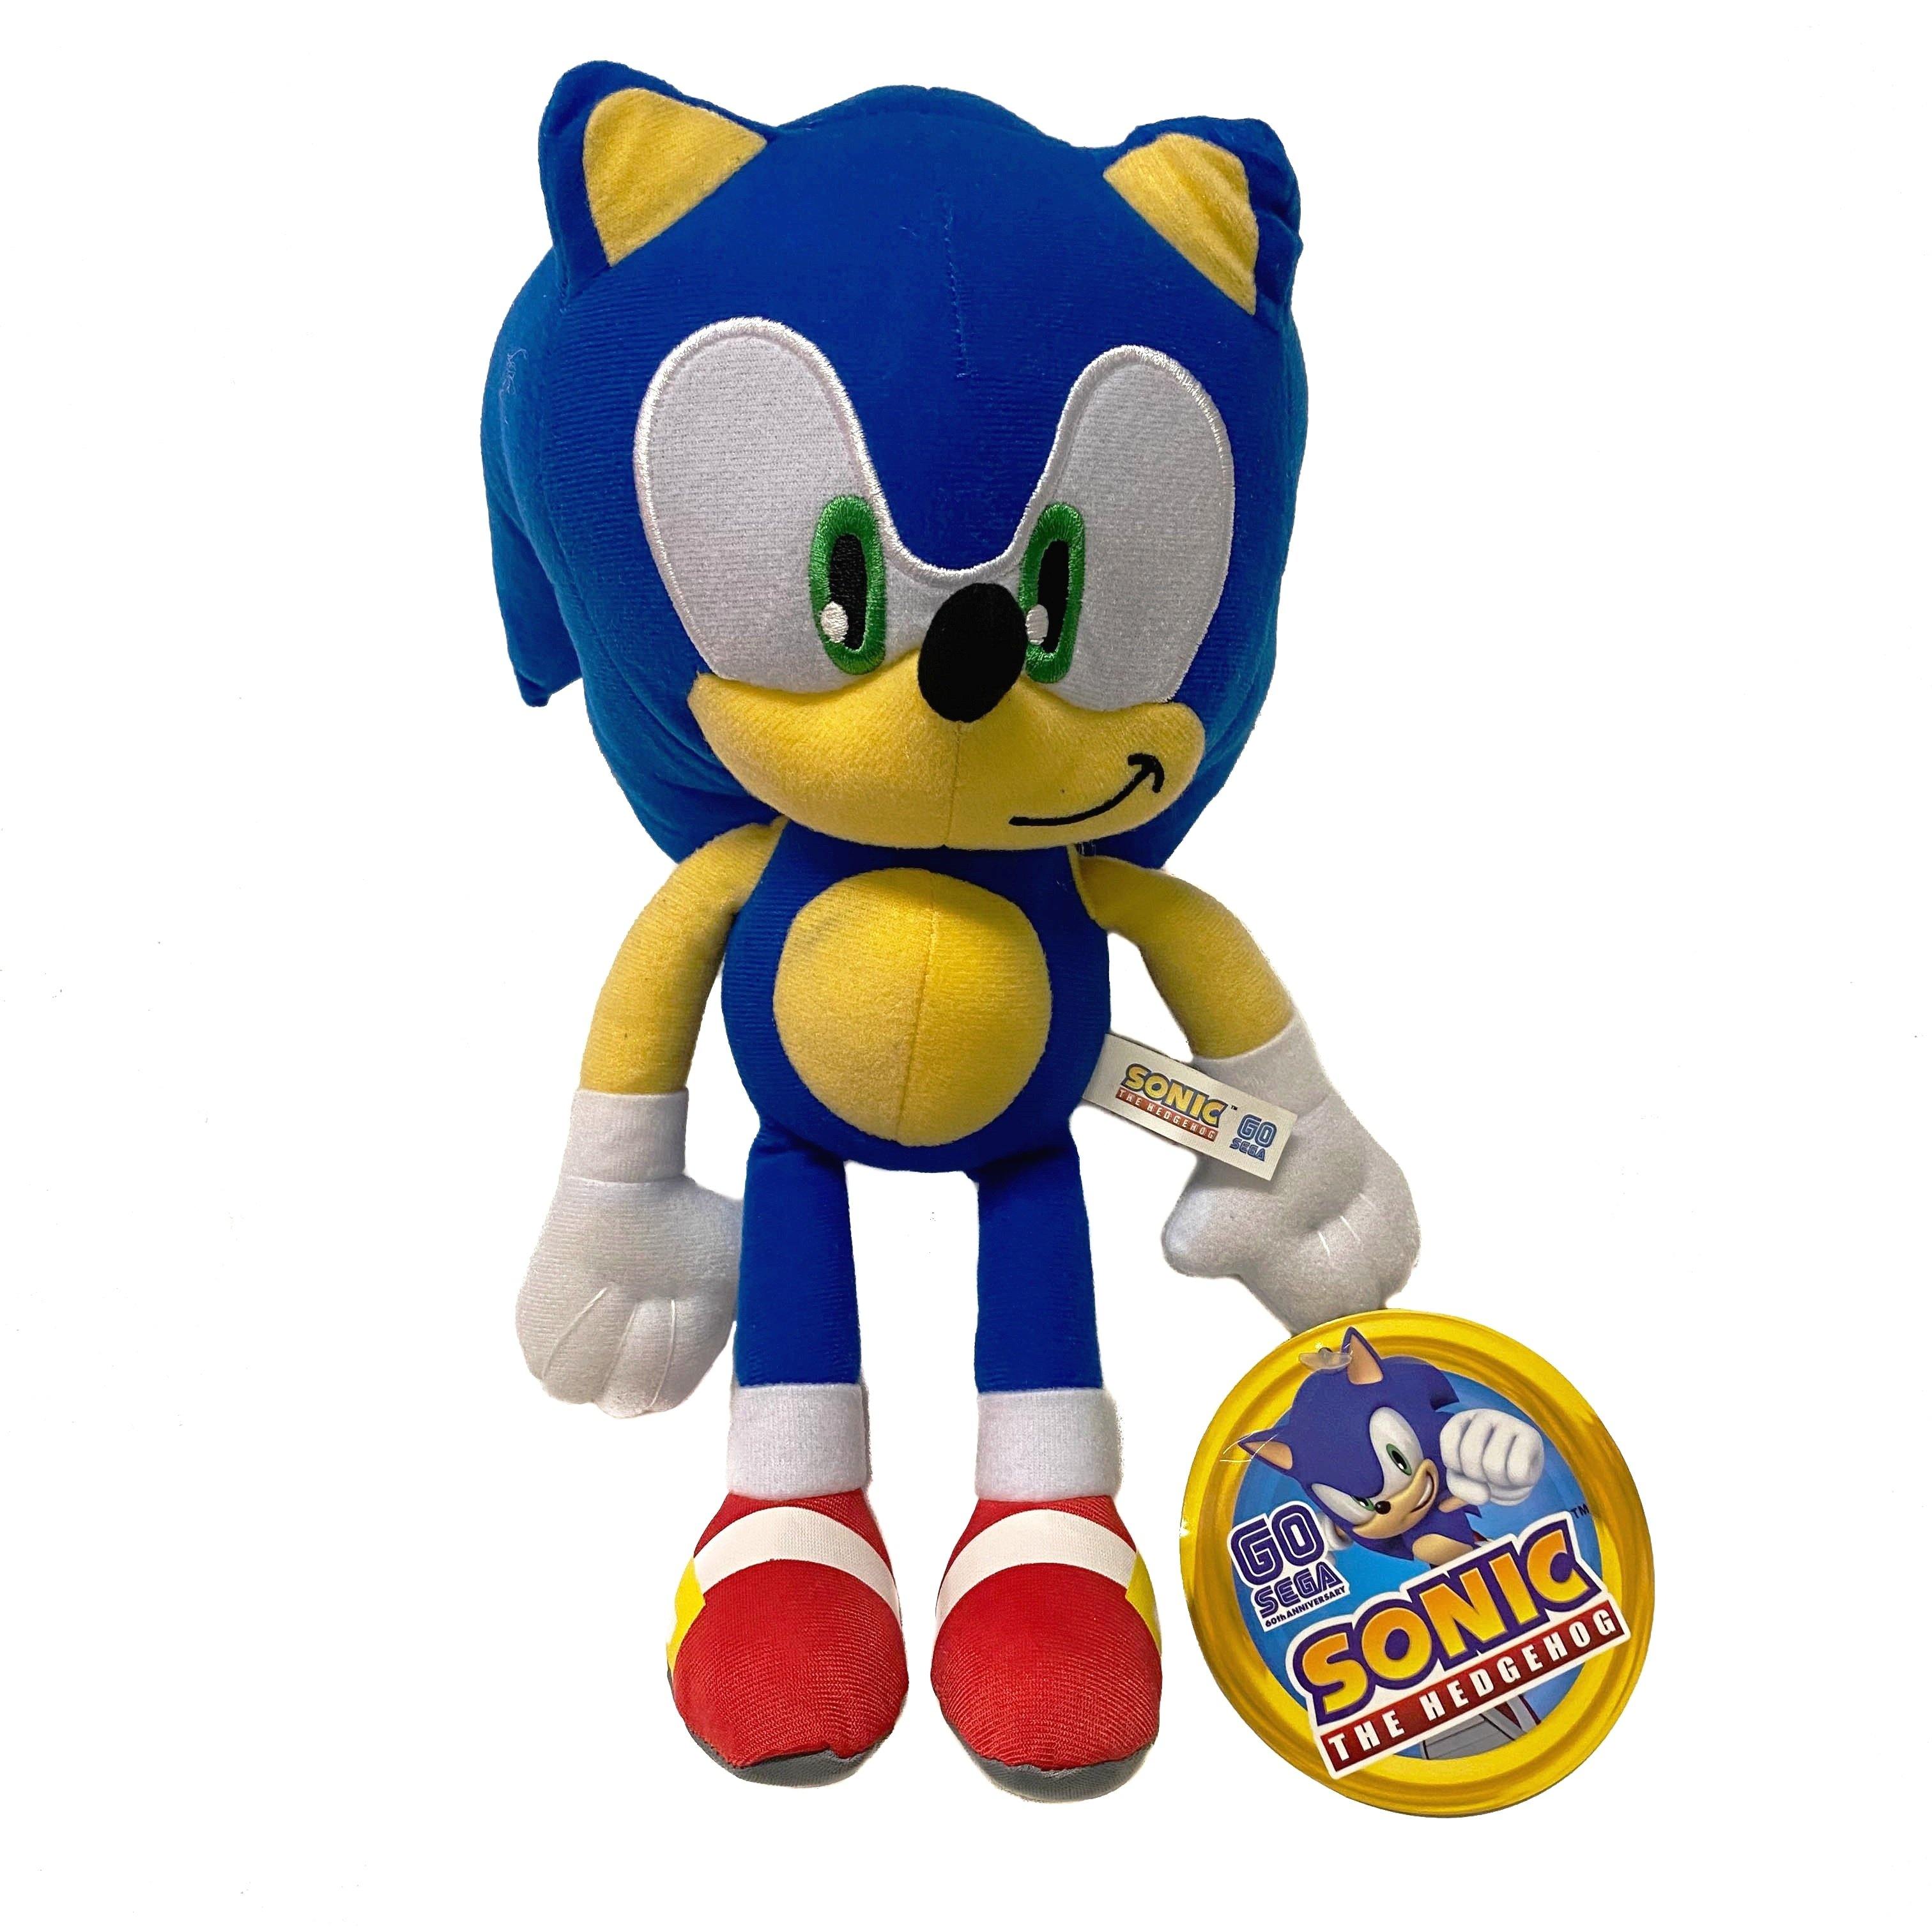 Sonic the Hedgehog 12" Authentic Plush Toys